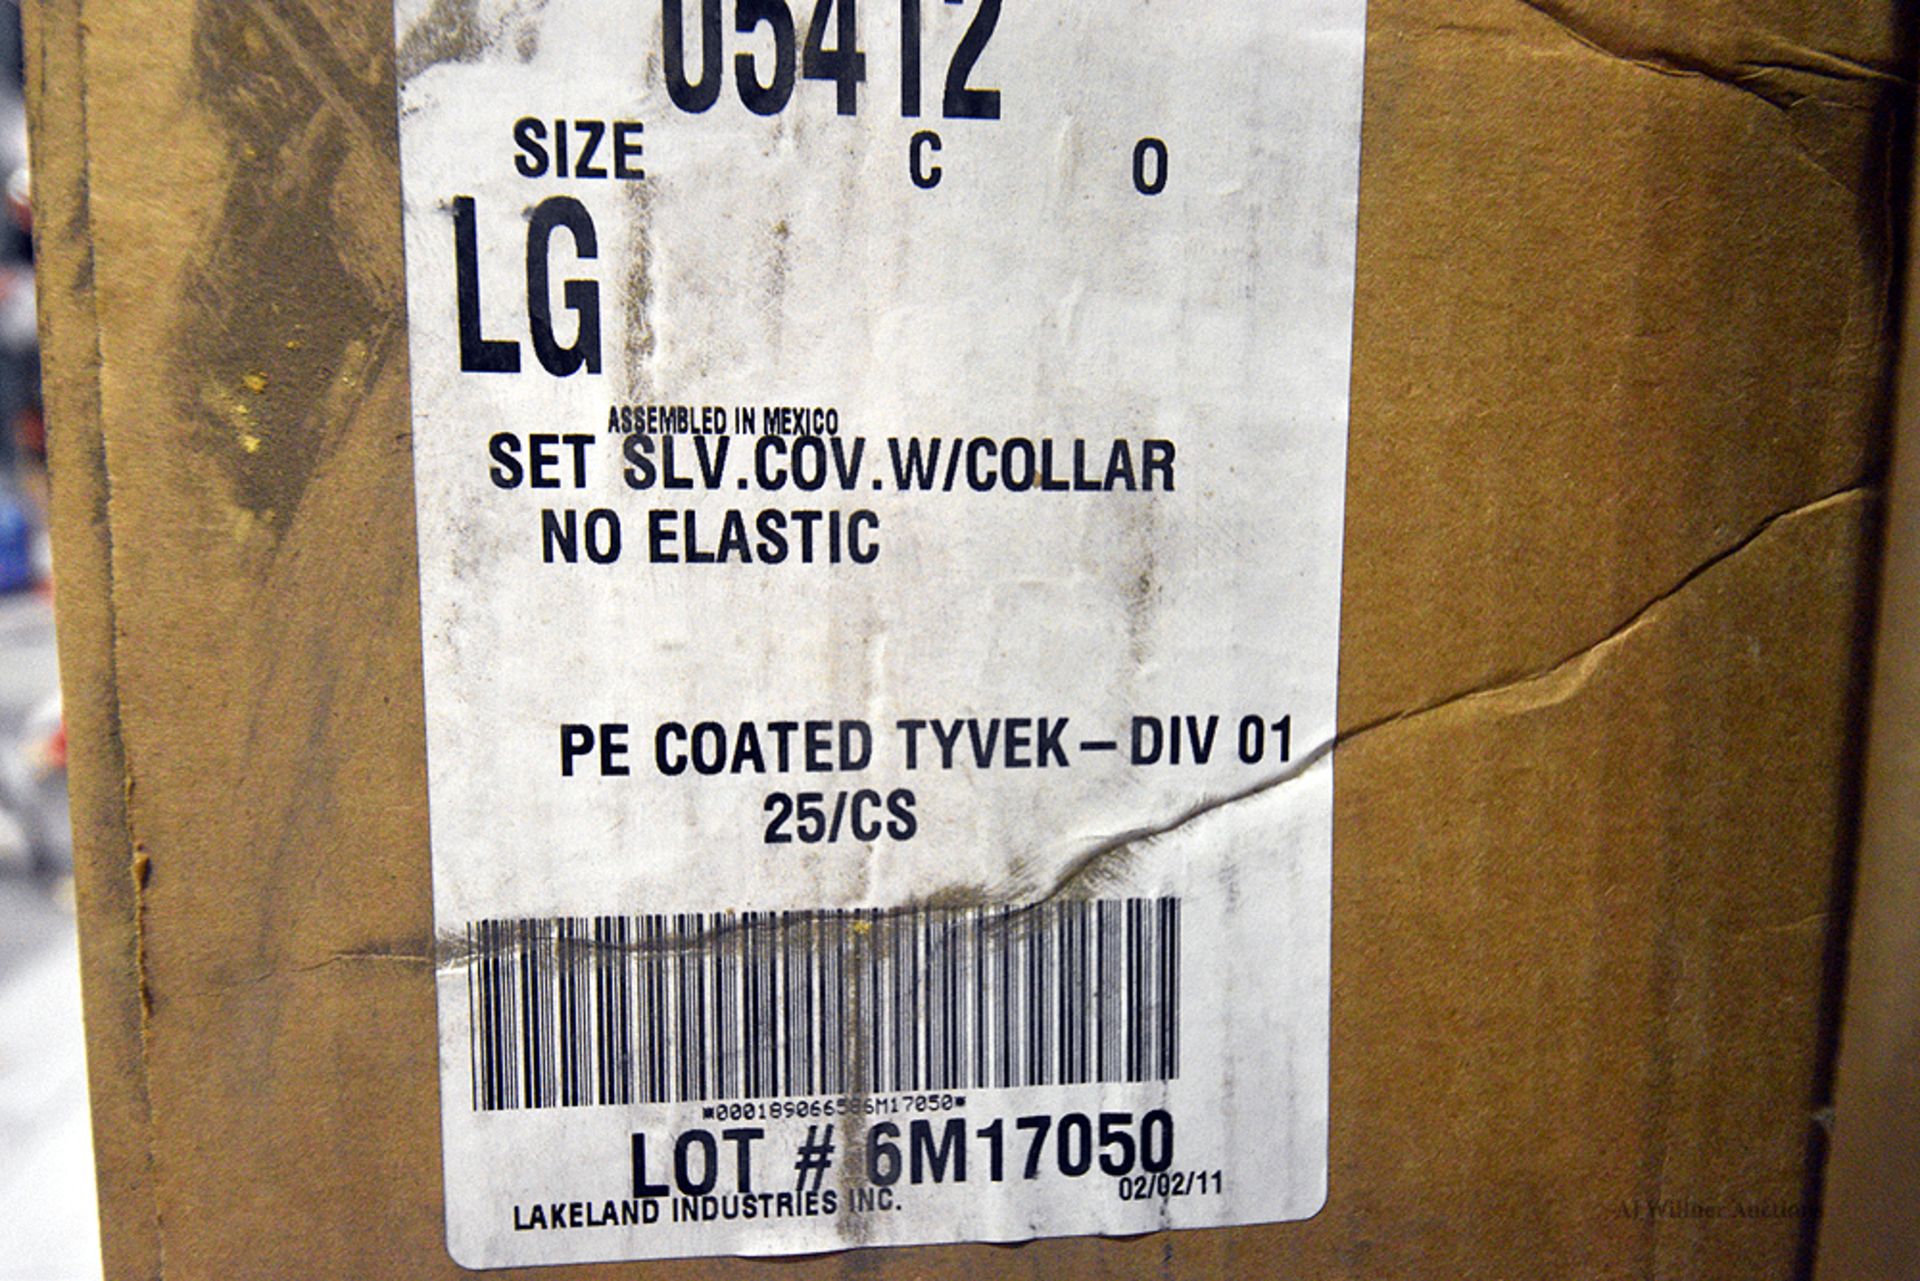 Boxes of 25pc - PE Coated Tyvek- Div 01 25/CS (Large) (Style # 05412) - Image 2 of 2